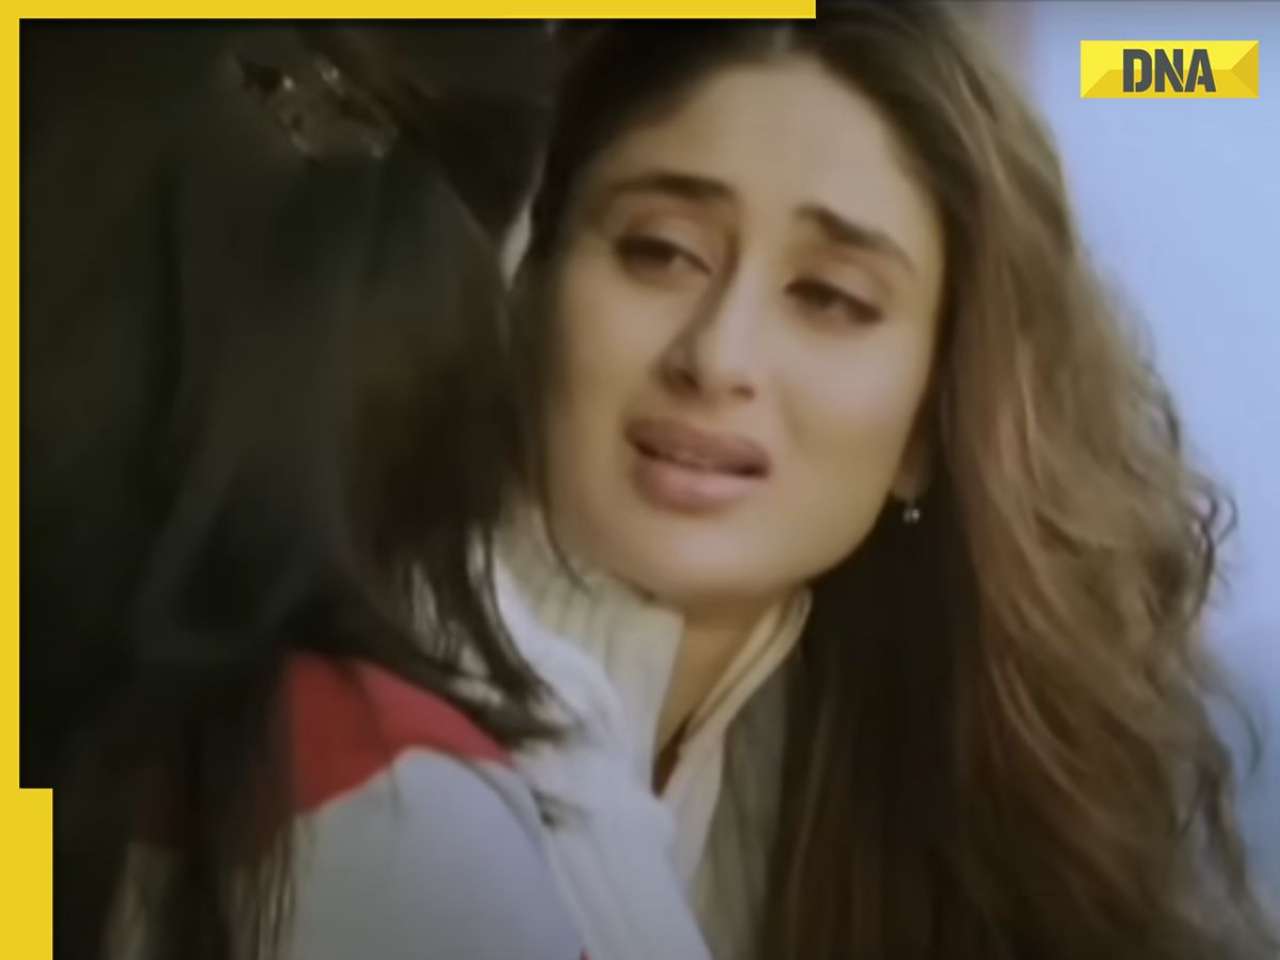 Kareena Kapoor's biggest flop was copied from Hollywood classic, delayed for years, actors didn't promote it, earned...